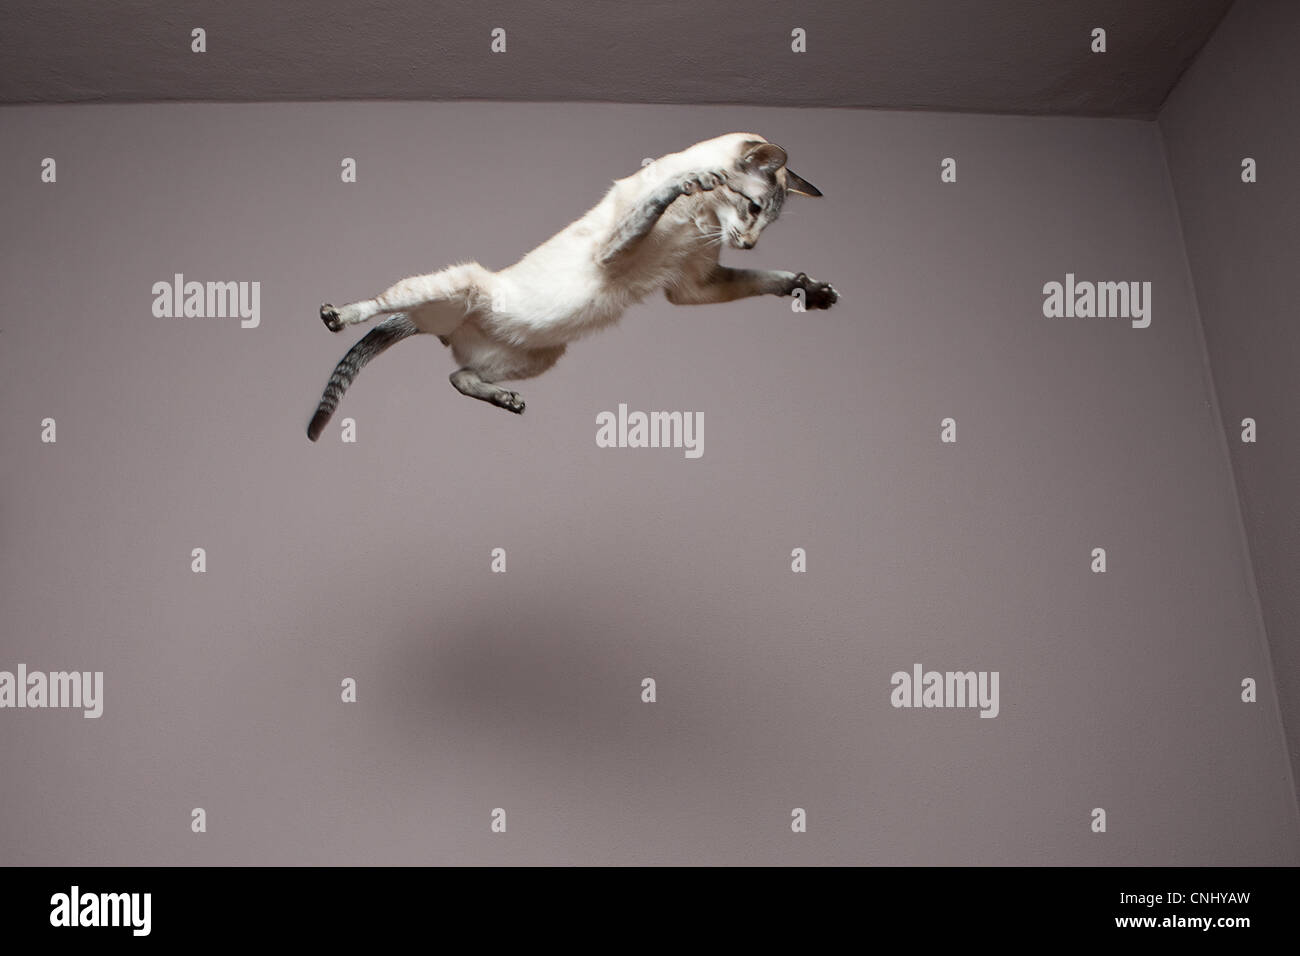 Siamese cat jumping in the air Stock Photo